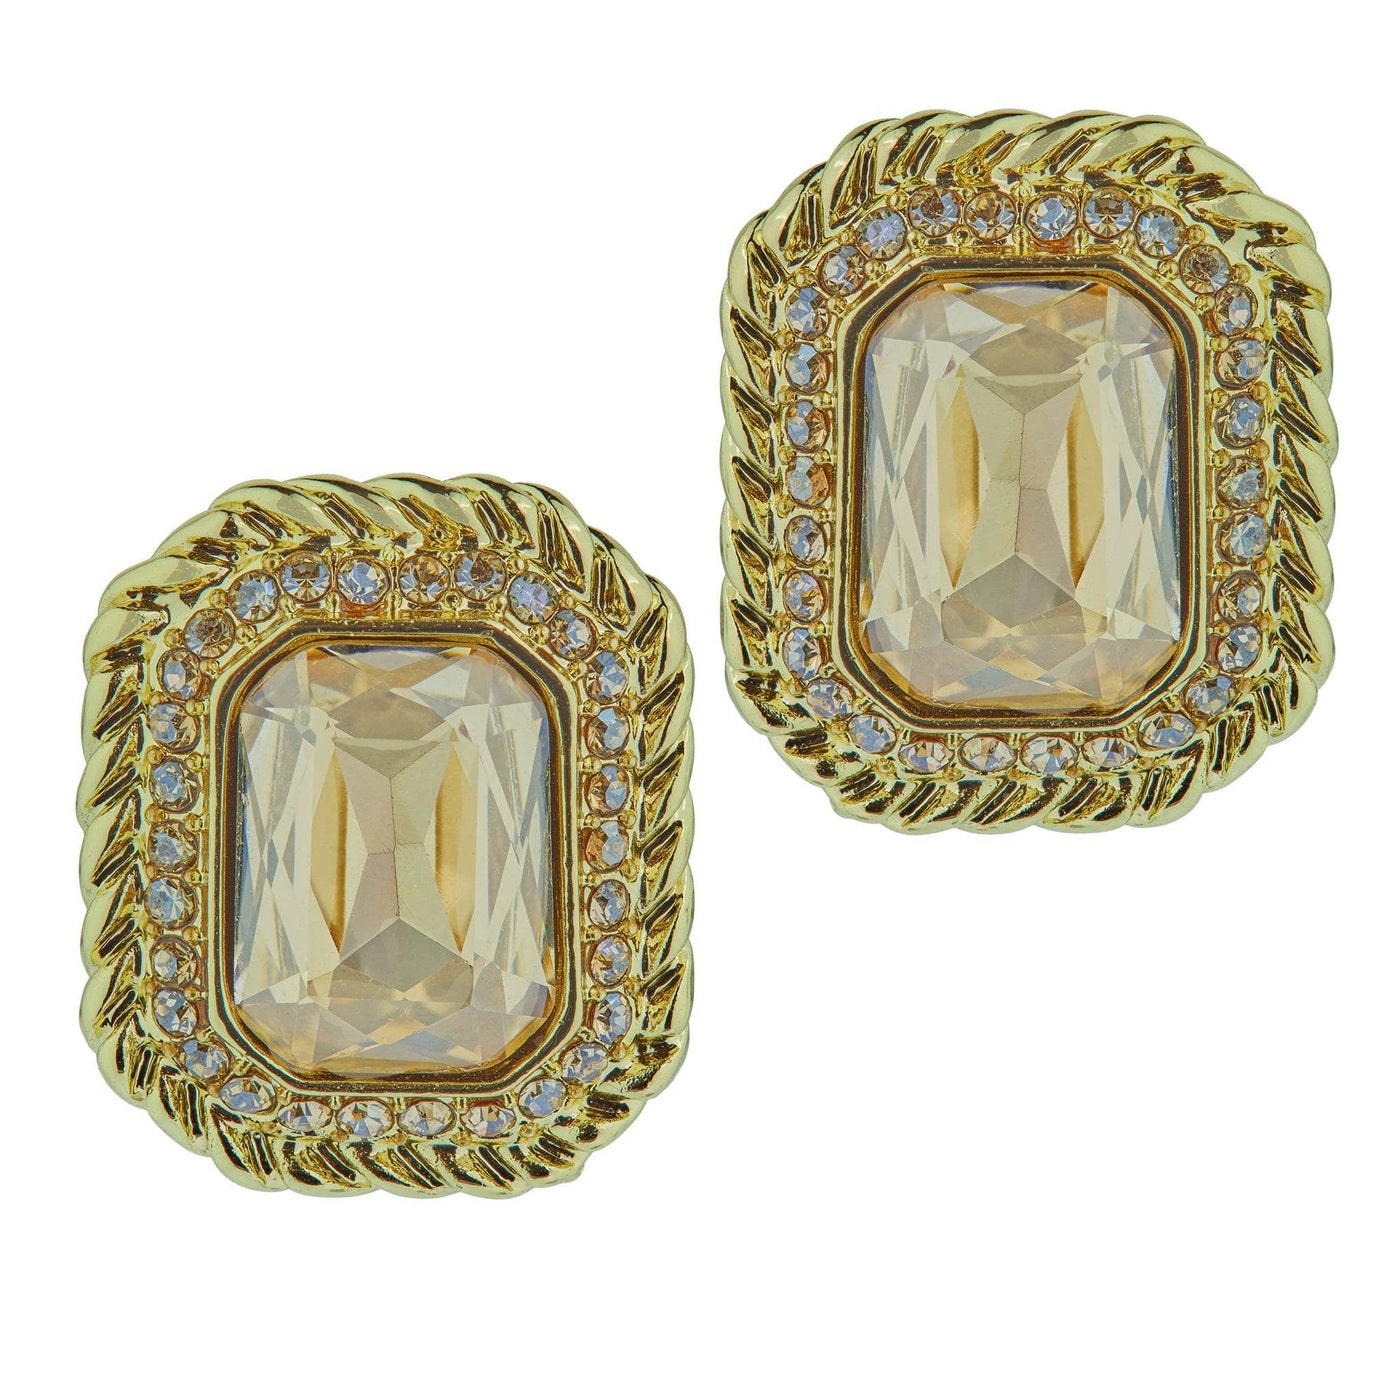 HEIDI DAUS®"Out Of The Box" Crystal Button Earrings